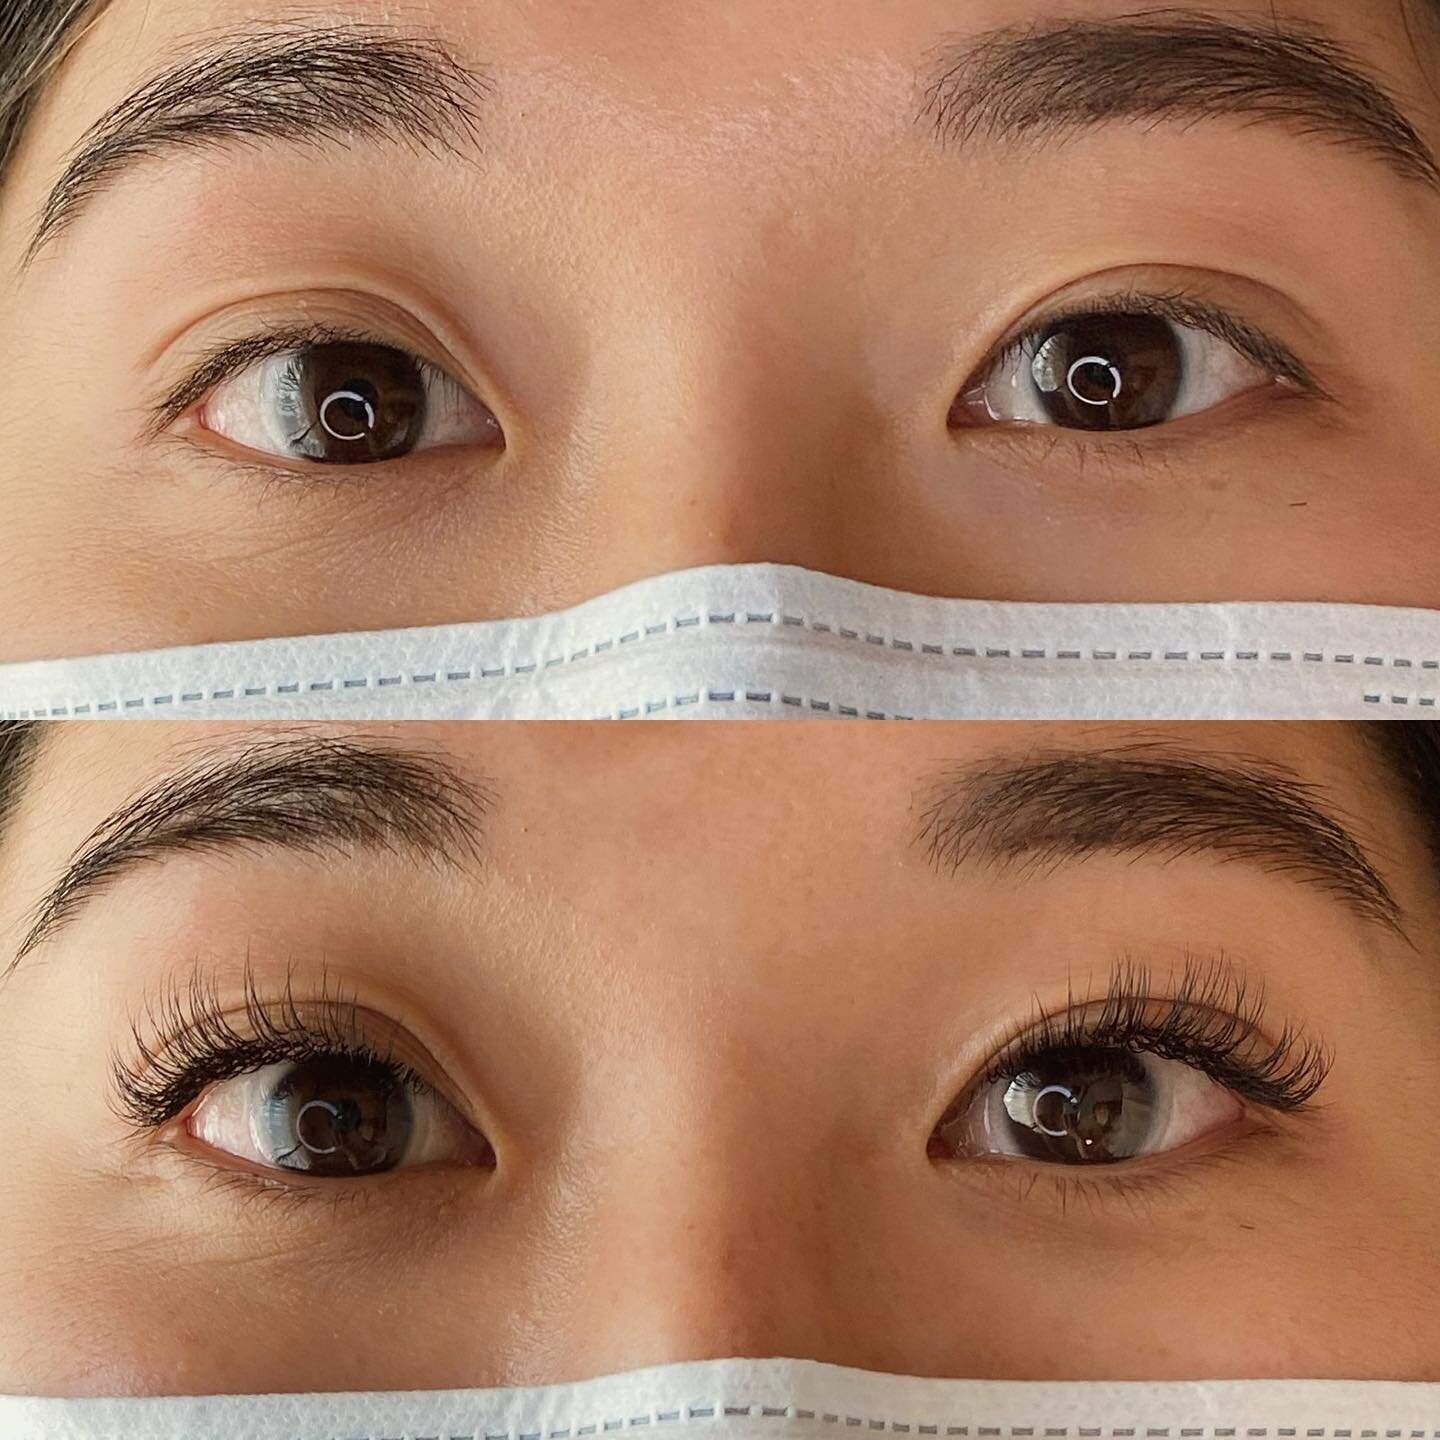 Remember to always avoid coffee and caffeine before your appointment. Caffeine can cause your eyes to flutter throughout the process, making it difficult to properly apply the extensions. Talking can also cause eye fluttering. I always recommend brin